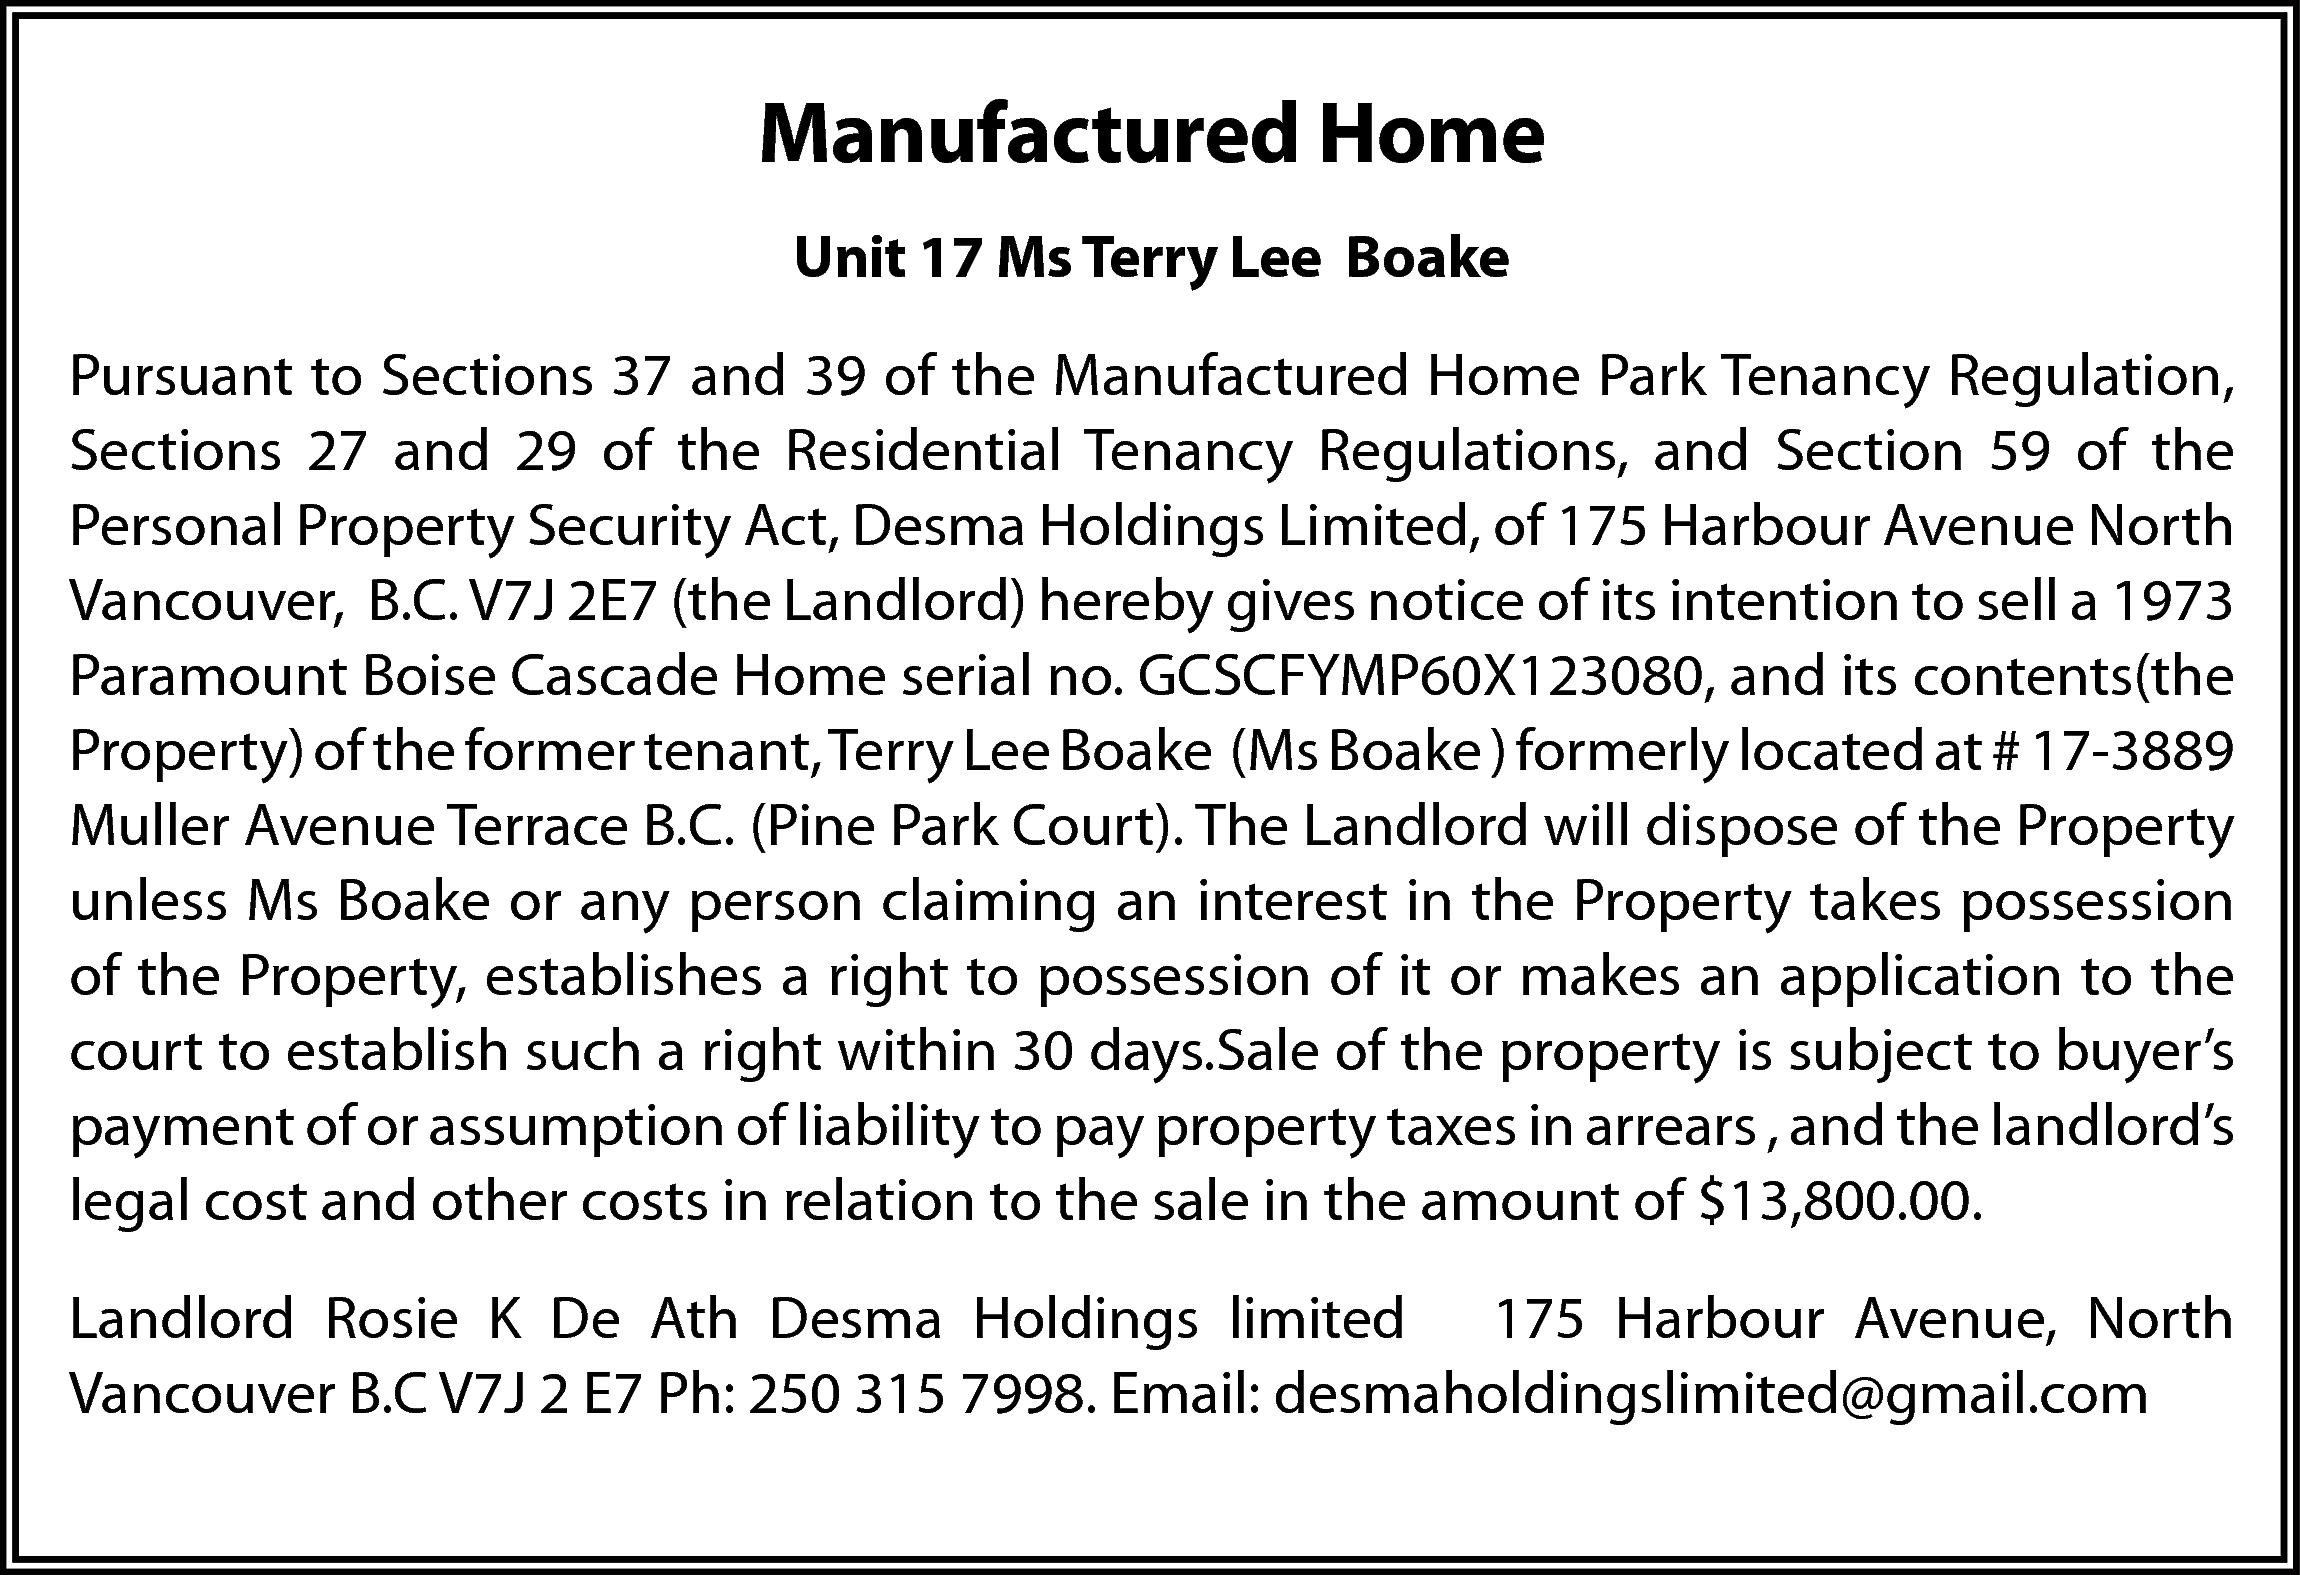 Manufactured Home <br>Unit 17 Ms  Manufactured Home  Unit 17 Ms Terry Lee Boake  Pursuant to Sections 37 and 39 of the Manufactured Home Park Tenancy Regulation,  Sections 27 and 29 of the Residential Tenancy Regulations, and Section 59 of the  Personal Property Security Act, Desma Holdings Limited, of 175 Harbour Avenue North  Vancouver, B.C. V7J 2E7 (the Landlord) hereby gives notice of its intention to sell a 1973  Paramount Boise Cascade Home serial no. GCSCFYMP60X123080, and its contents(the  Property) of the former tenant, Terry Lee Boake (Ms Boake ) formerly located at # 17-3889  Muller Avenue Terrace B.C. (Pine Park Court). The Landlord will dispose of the Property  unless Ms Boake or any person claiming an interest in the Property takes possession  of the Property, establishes a right to possession of it or makes an application to the  court to establish such a right within 30 days.Sale of the property is subject to buyer’s  payment of or assumption of liability to pay property taxes in arrears , and the landlord’s  legal cost and other costs in relation to the sale in the amount of $13,800.00.  Landlord Rosie K De Ath Desma Holdings limited 175 Harbour Avenue, North  Vancouver B.C V7J 2 E7 Ph: 250 315 7998. Email: desmaholdingslimited@gmail.com    